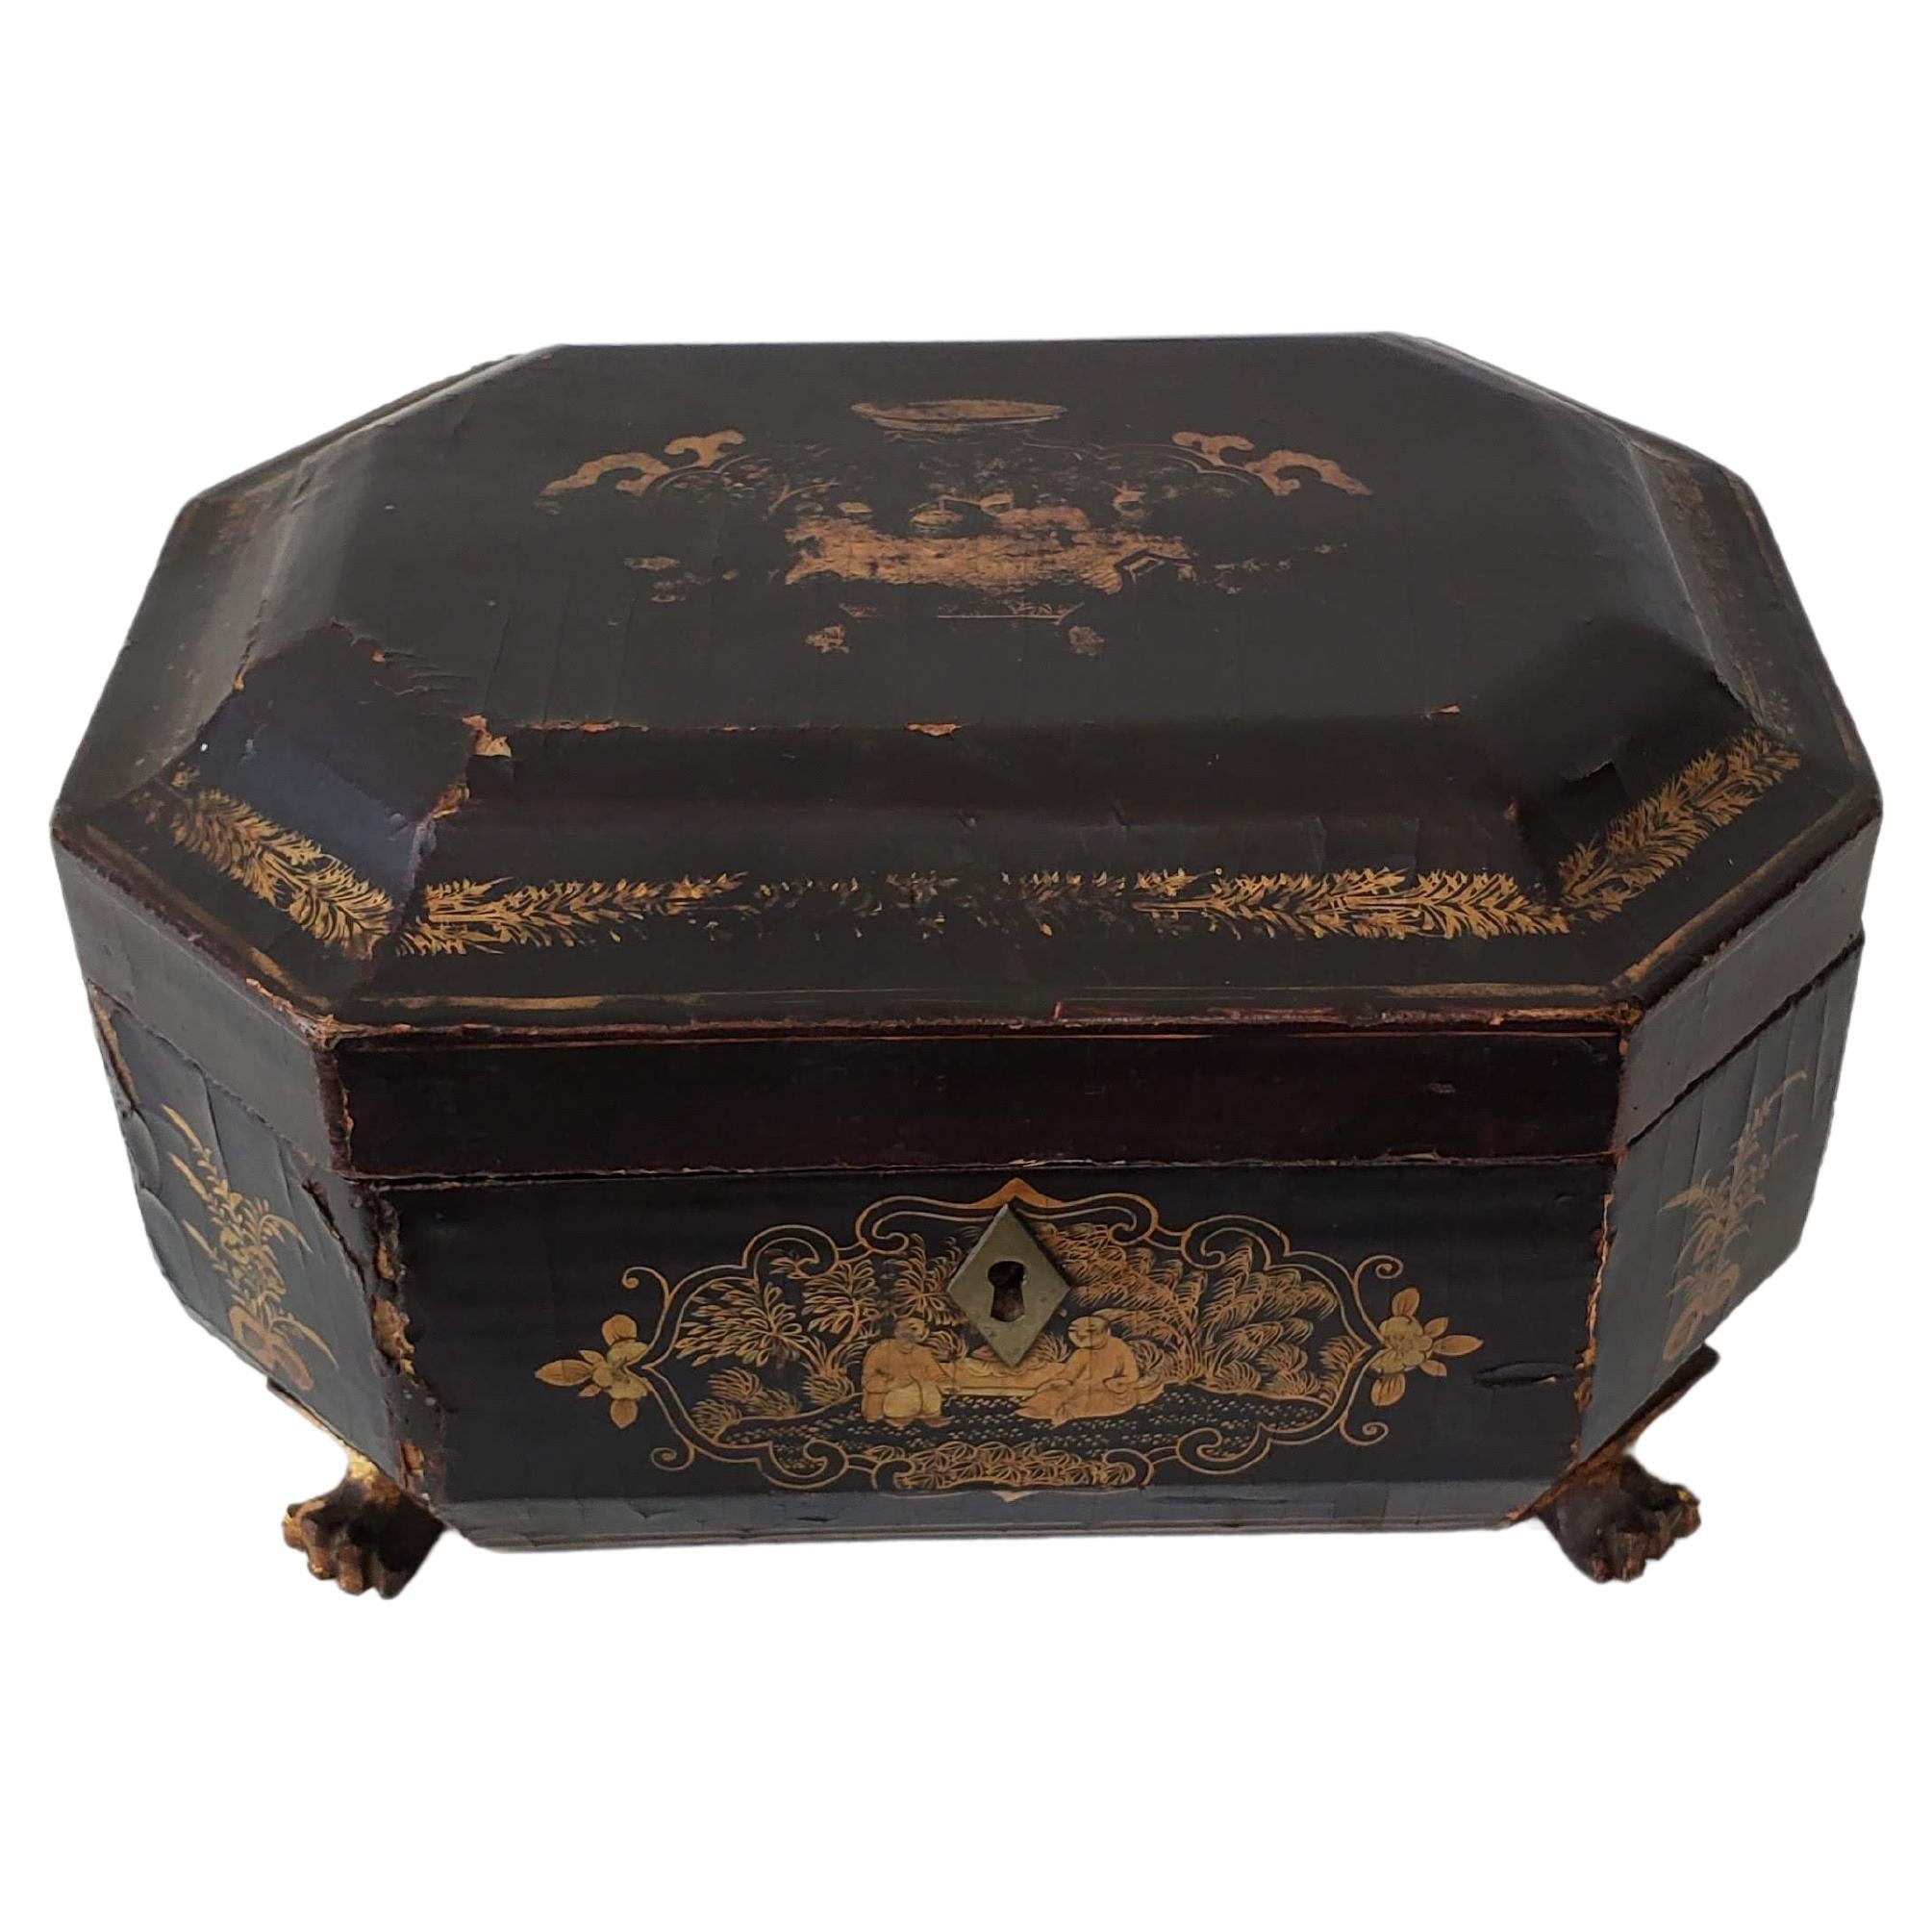 Antique Chinese Export Black Lacquer Tea Caddy 